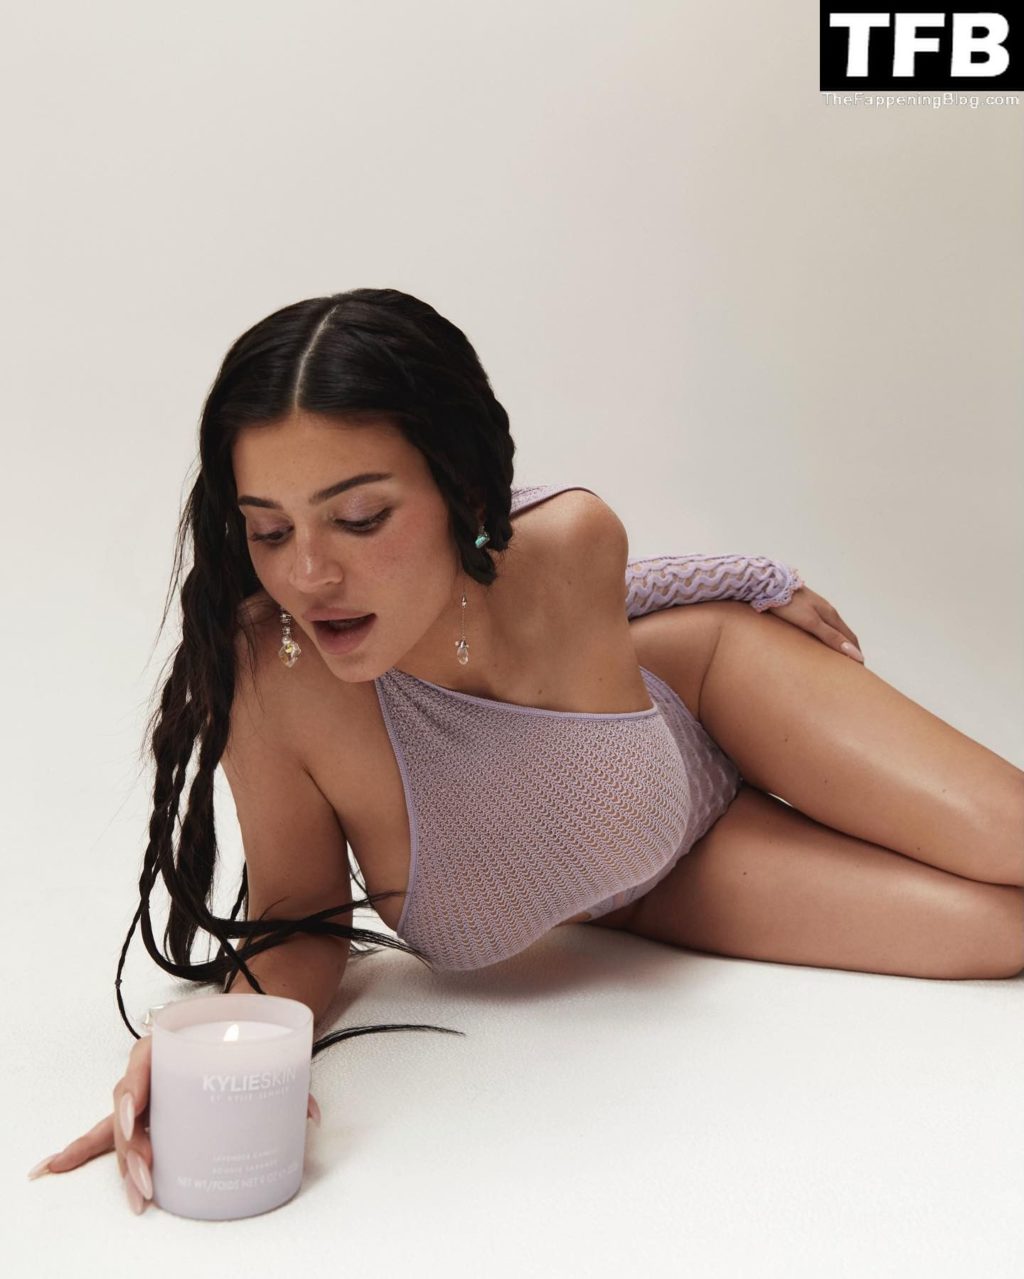 Kylie Jenner Gorgeous Curves 11 thefappeningblog.com  1024x1279 - Kylie Jenner Promotes Her Kylie Skin Collection in a Sexy Shoot (13 Photos)